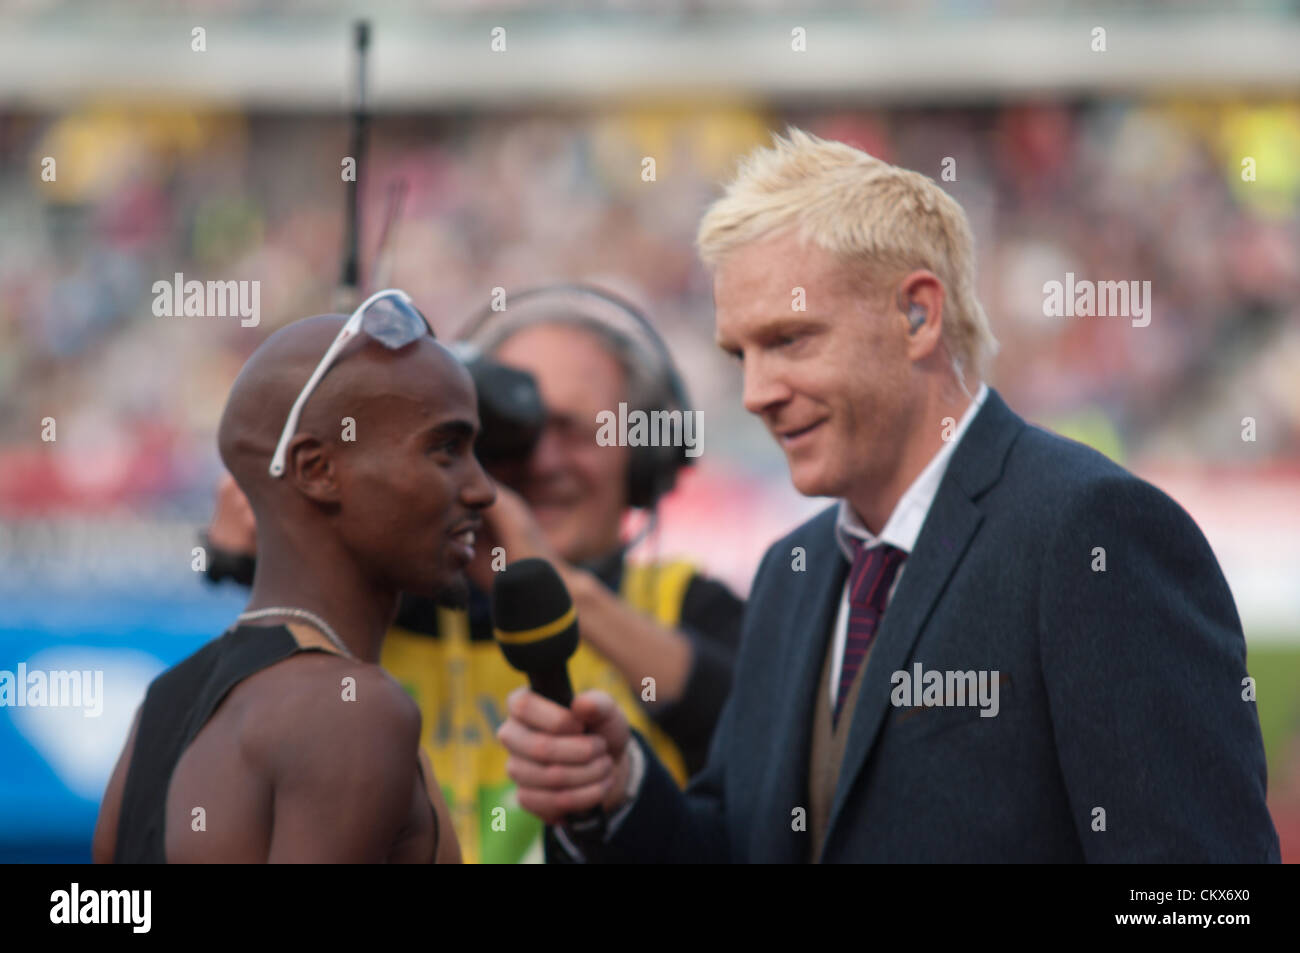 Mo Farah of Great Britain being interviewed after winning the 2 mile race at the Diamond League Athletics meeting in the Alexander Stadium, Birmingham, 2012 Stock Photo